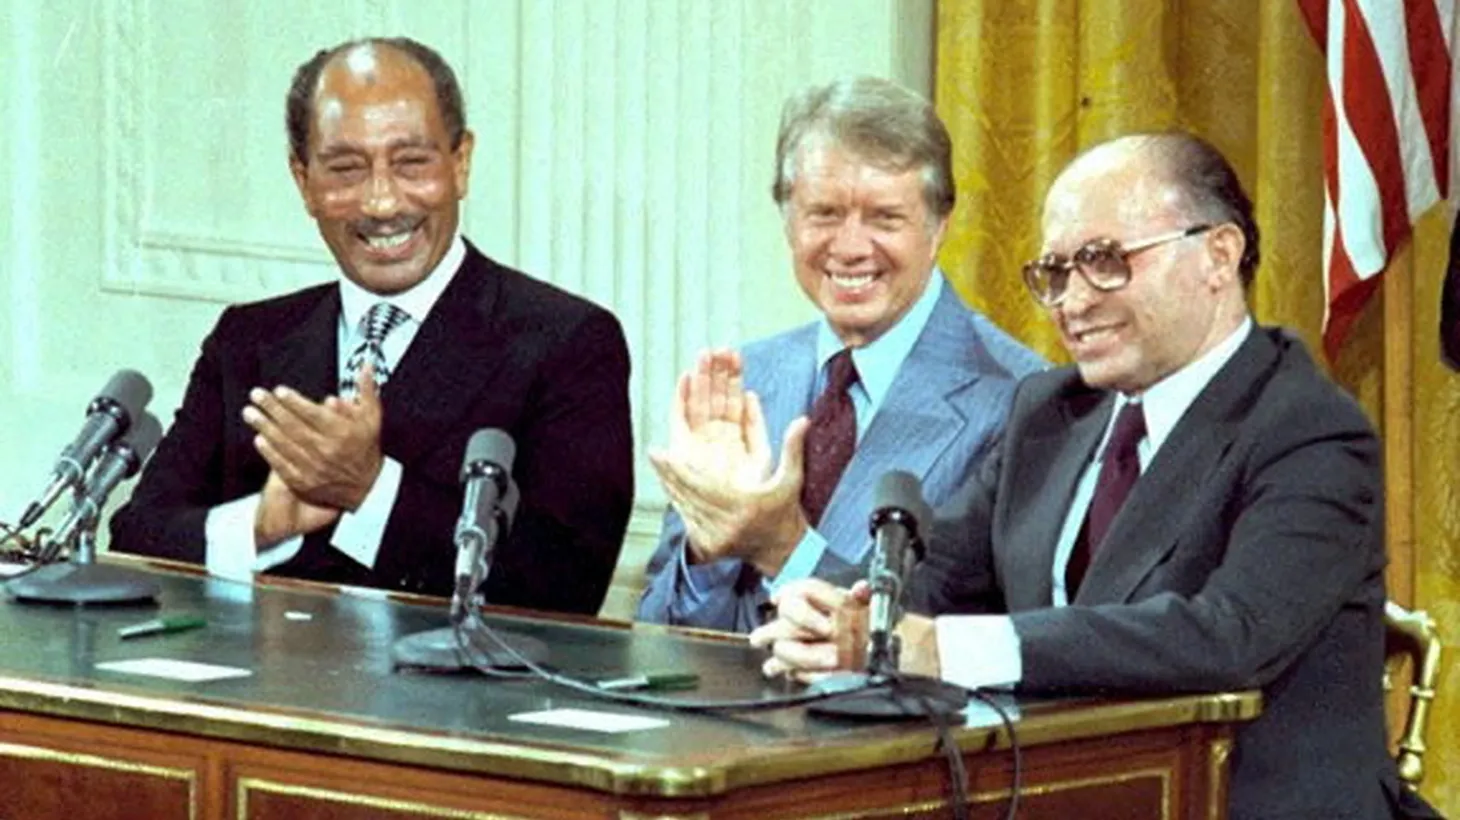 U.S. President Jimmy Carter, Egyptian President Anwar Sadat and Israeli Prime Minister Menachem Begin celebrate the signing of the Camp David Accords in the East Room of the White House in Washington, D.C., September 17, 1978.